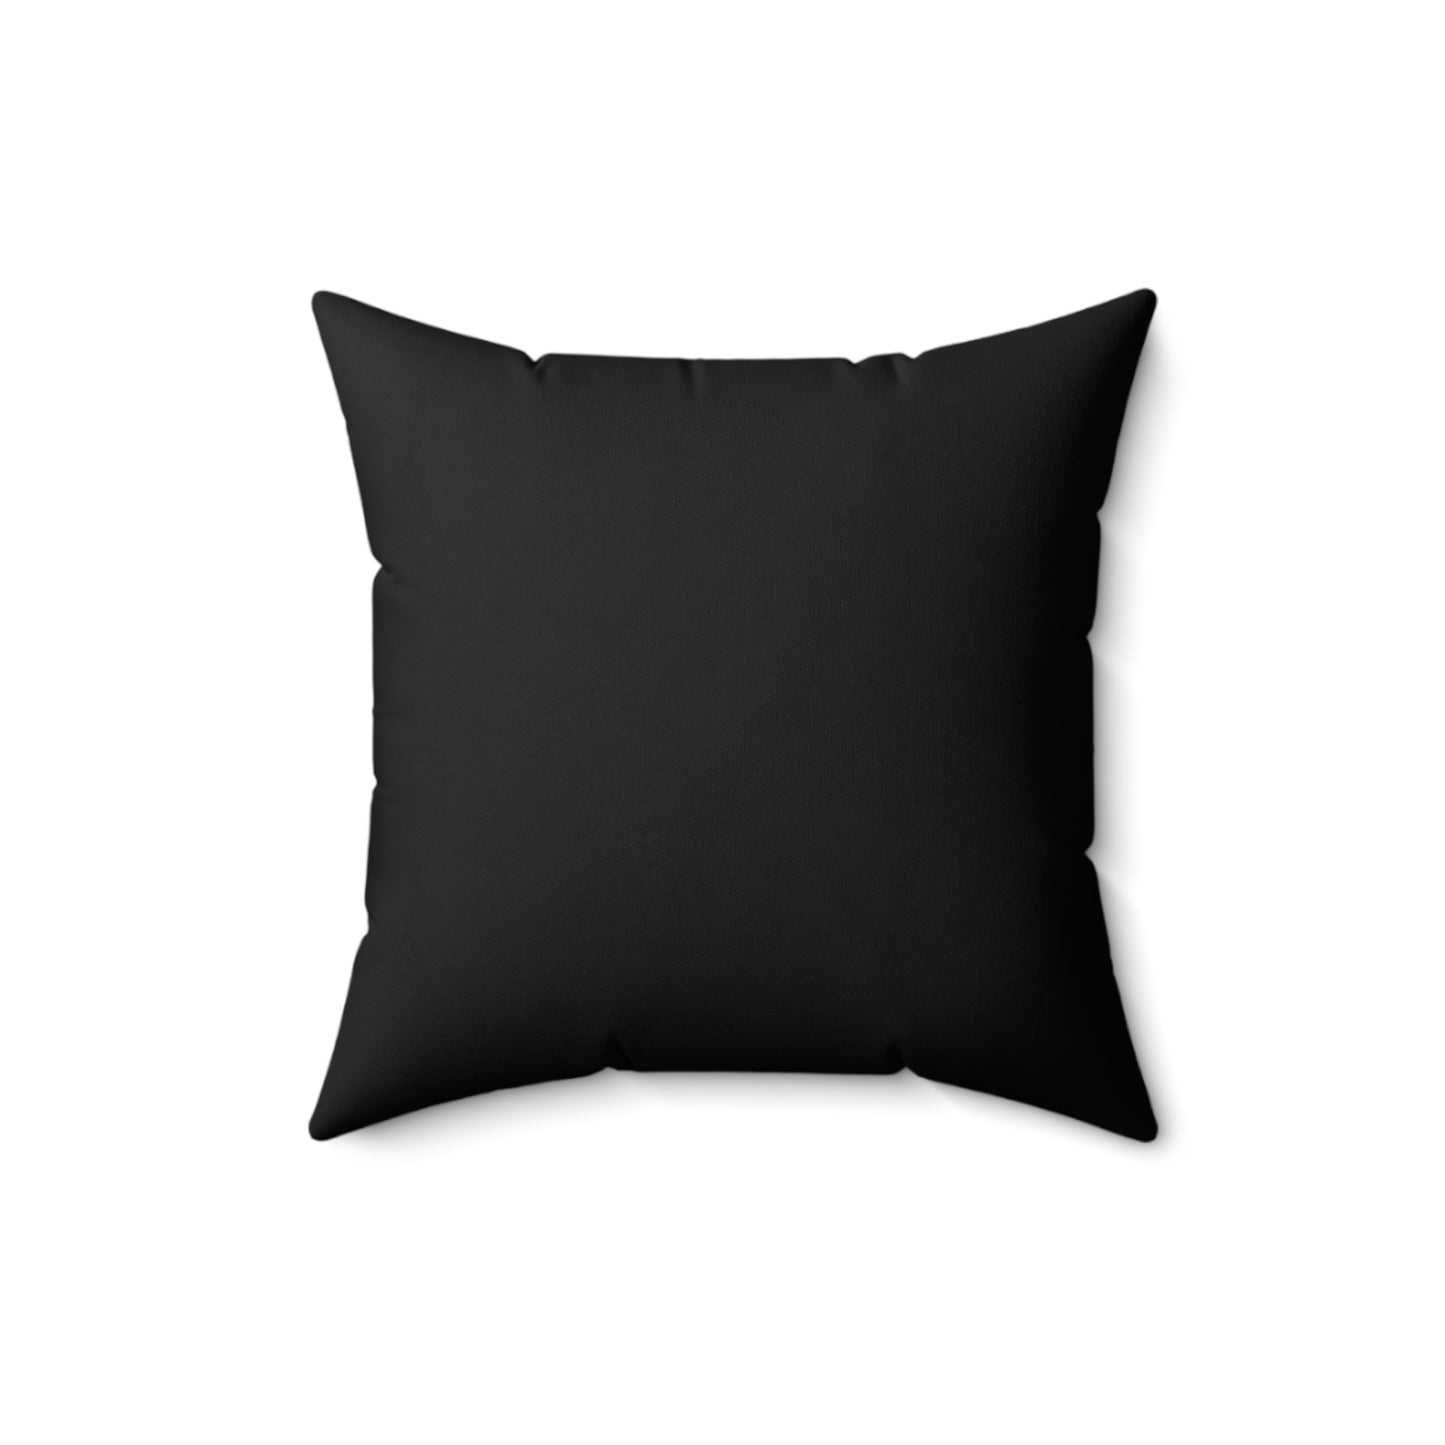 Daisy Flower Square Pillow